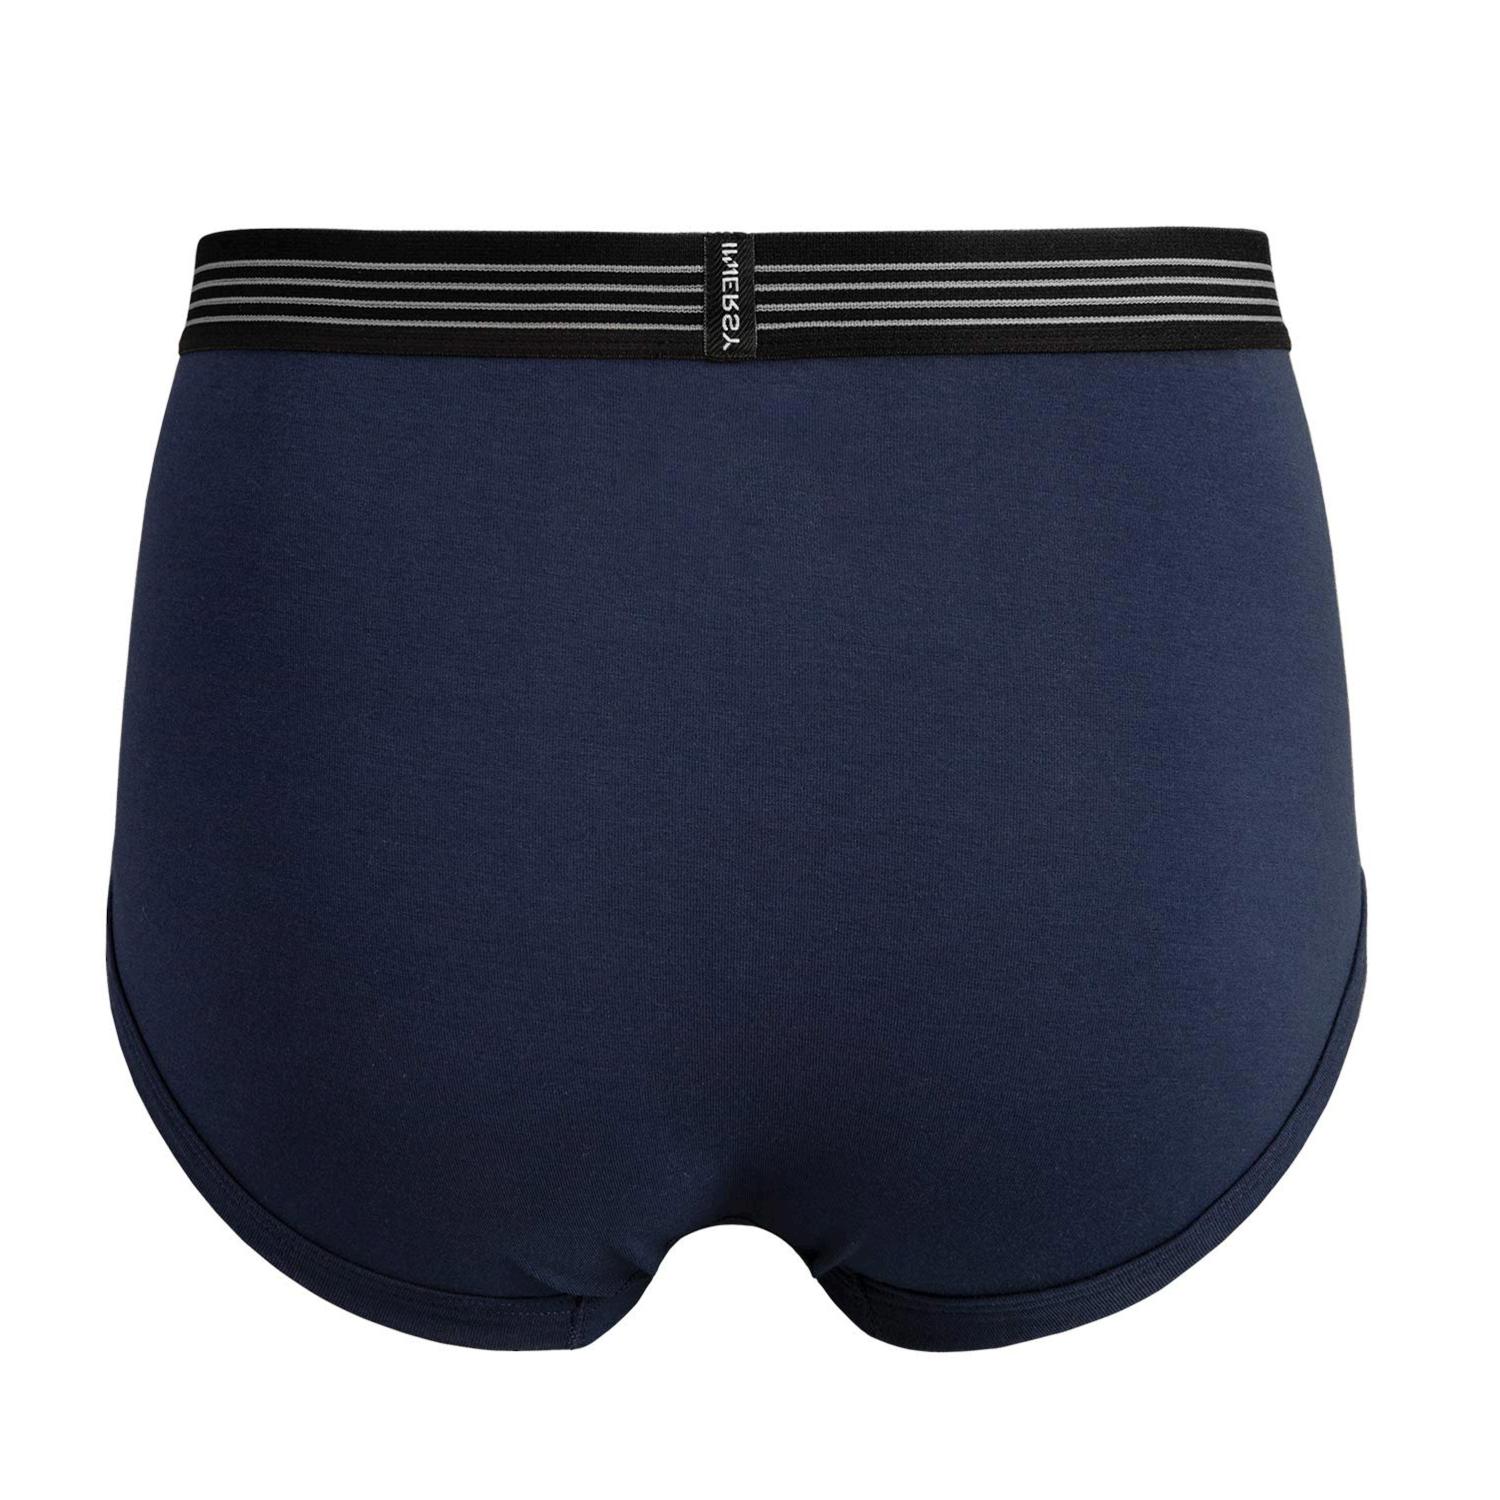 INNERSY MEN'S UNDERWEAR Classic Cotton Briefs with N, Navy Blue, Size  X-Small £12.99 - PicClick UK